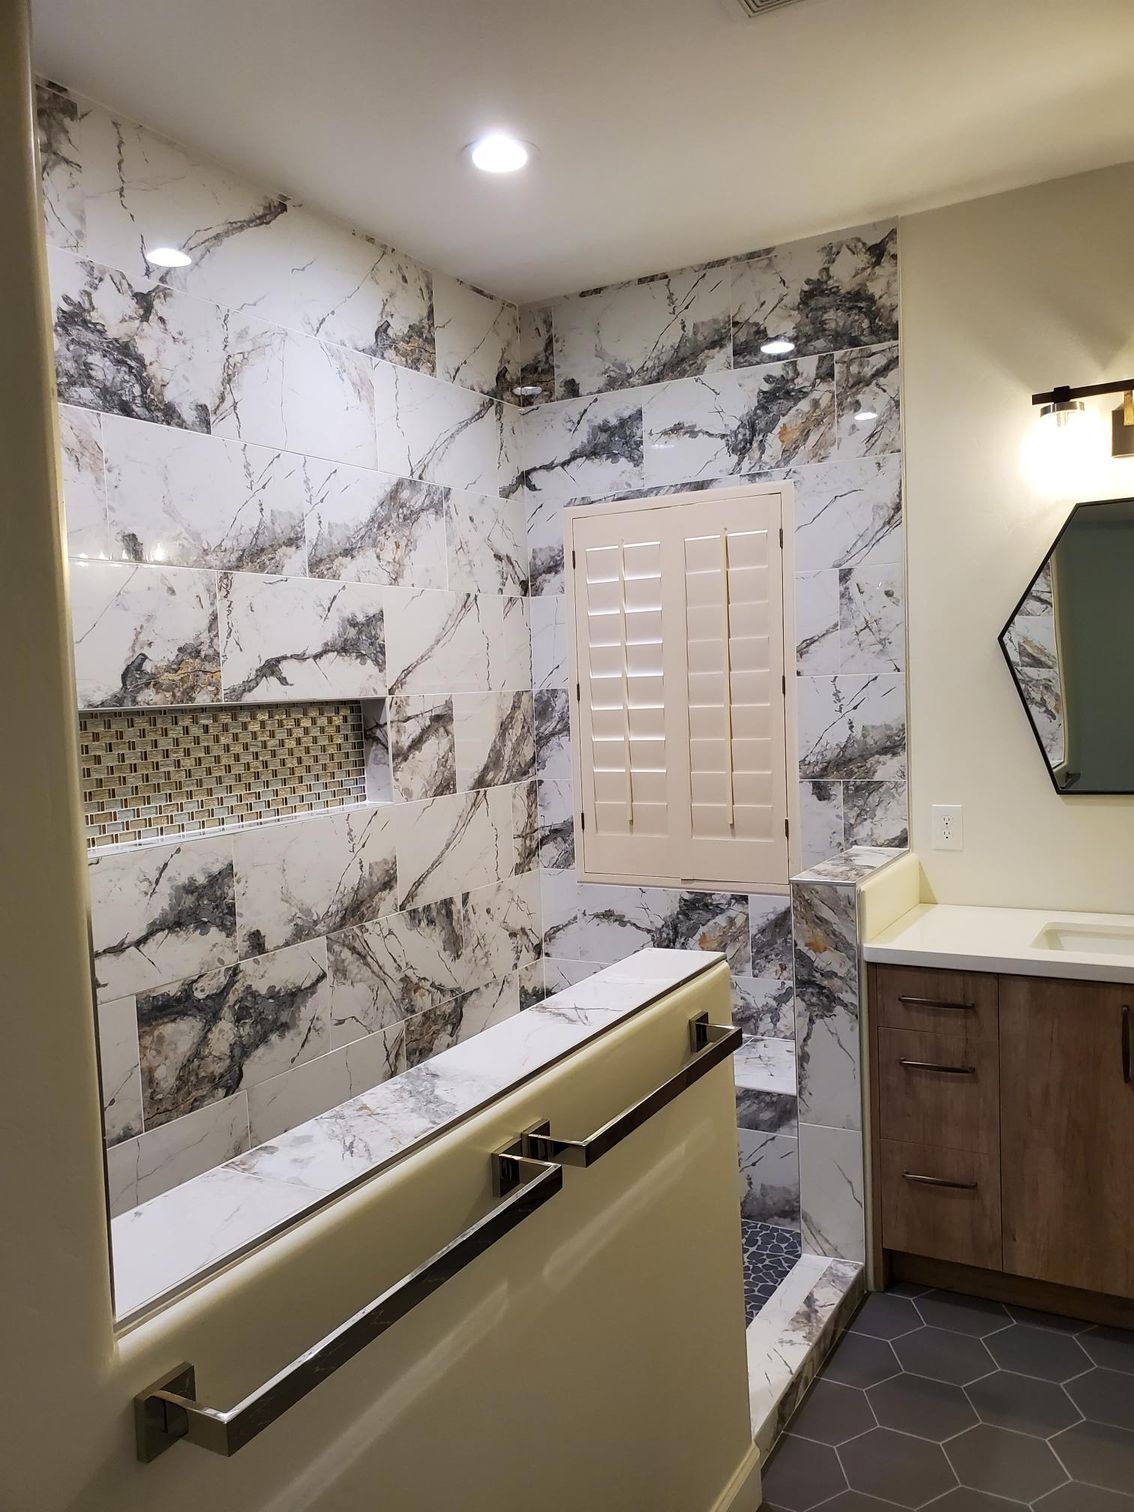 Spacious walk-in shower with marble tile walls and floor, glass door, chrome showerhead, and built-in bench.